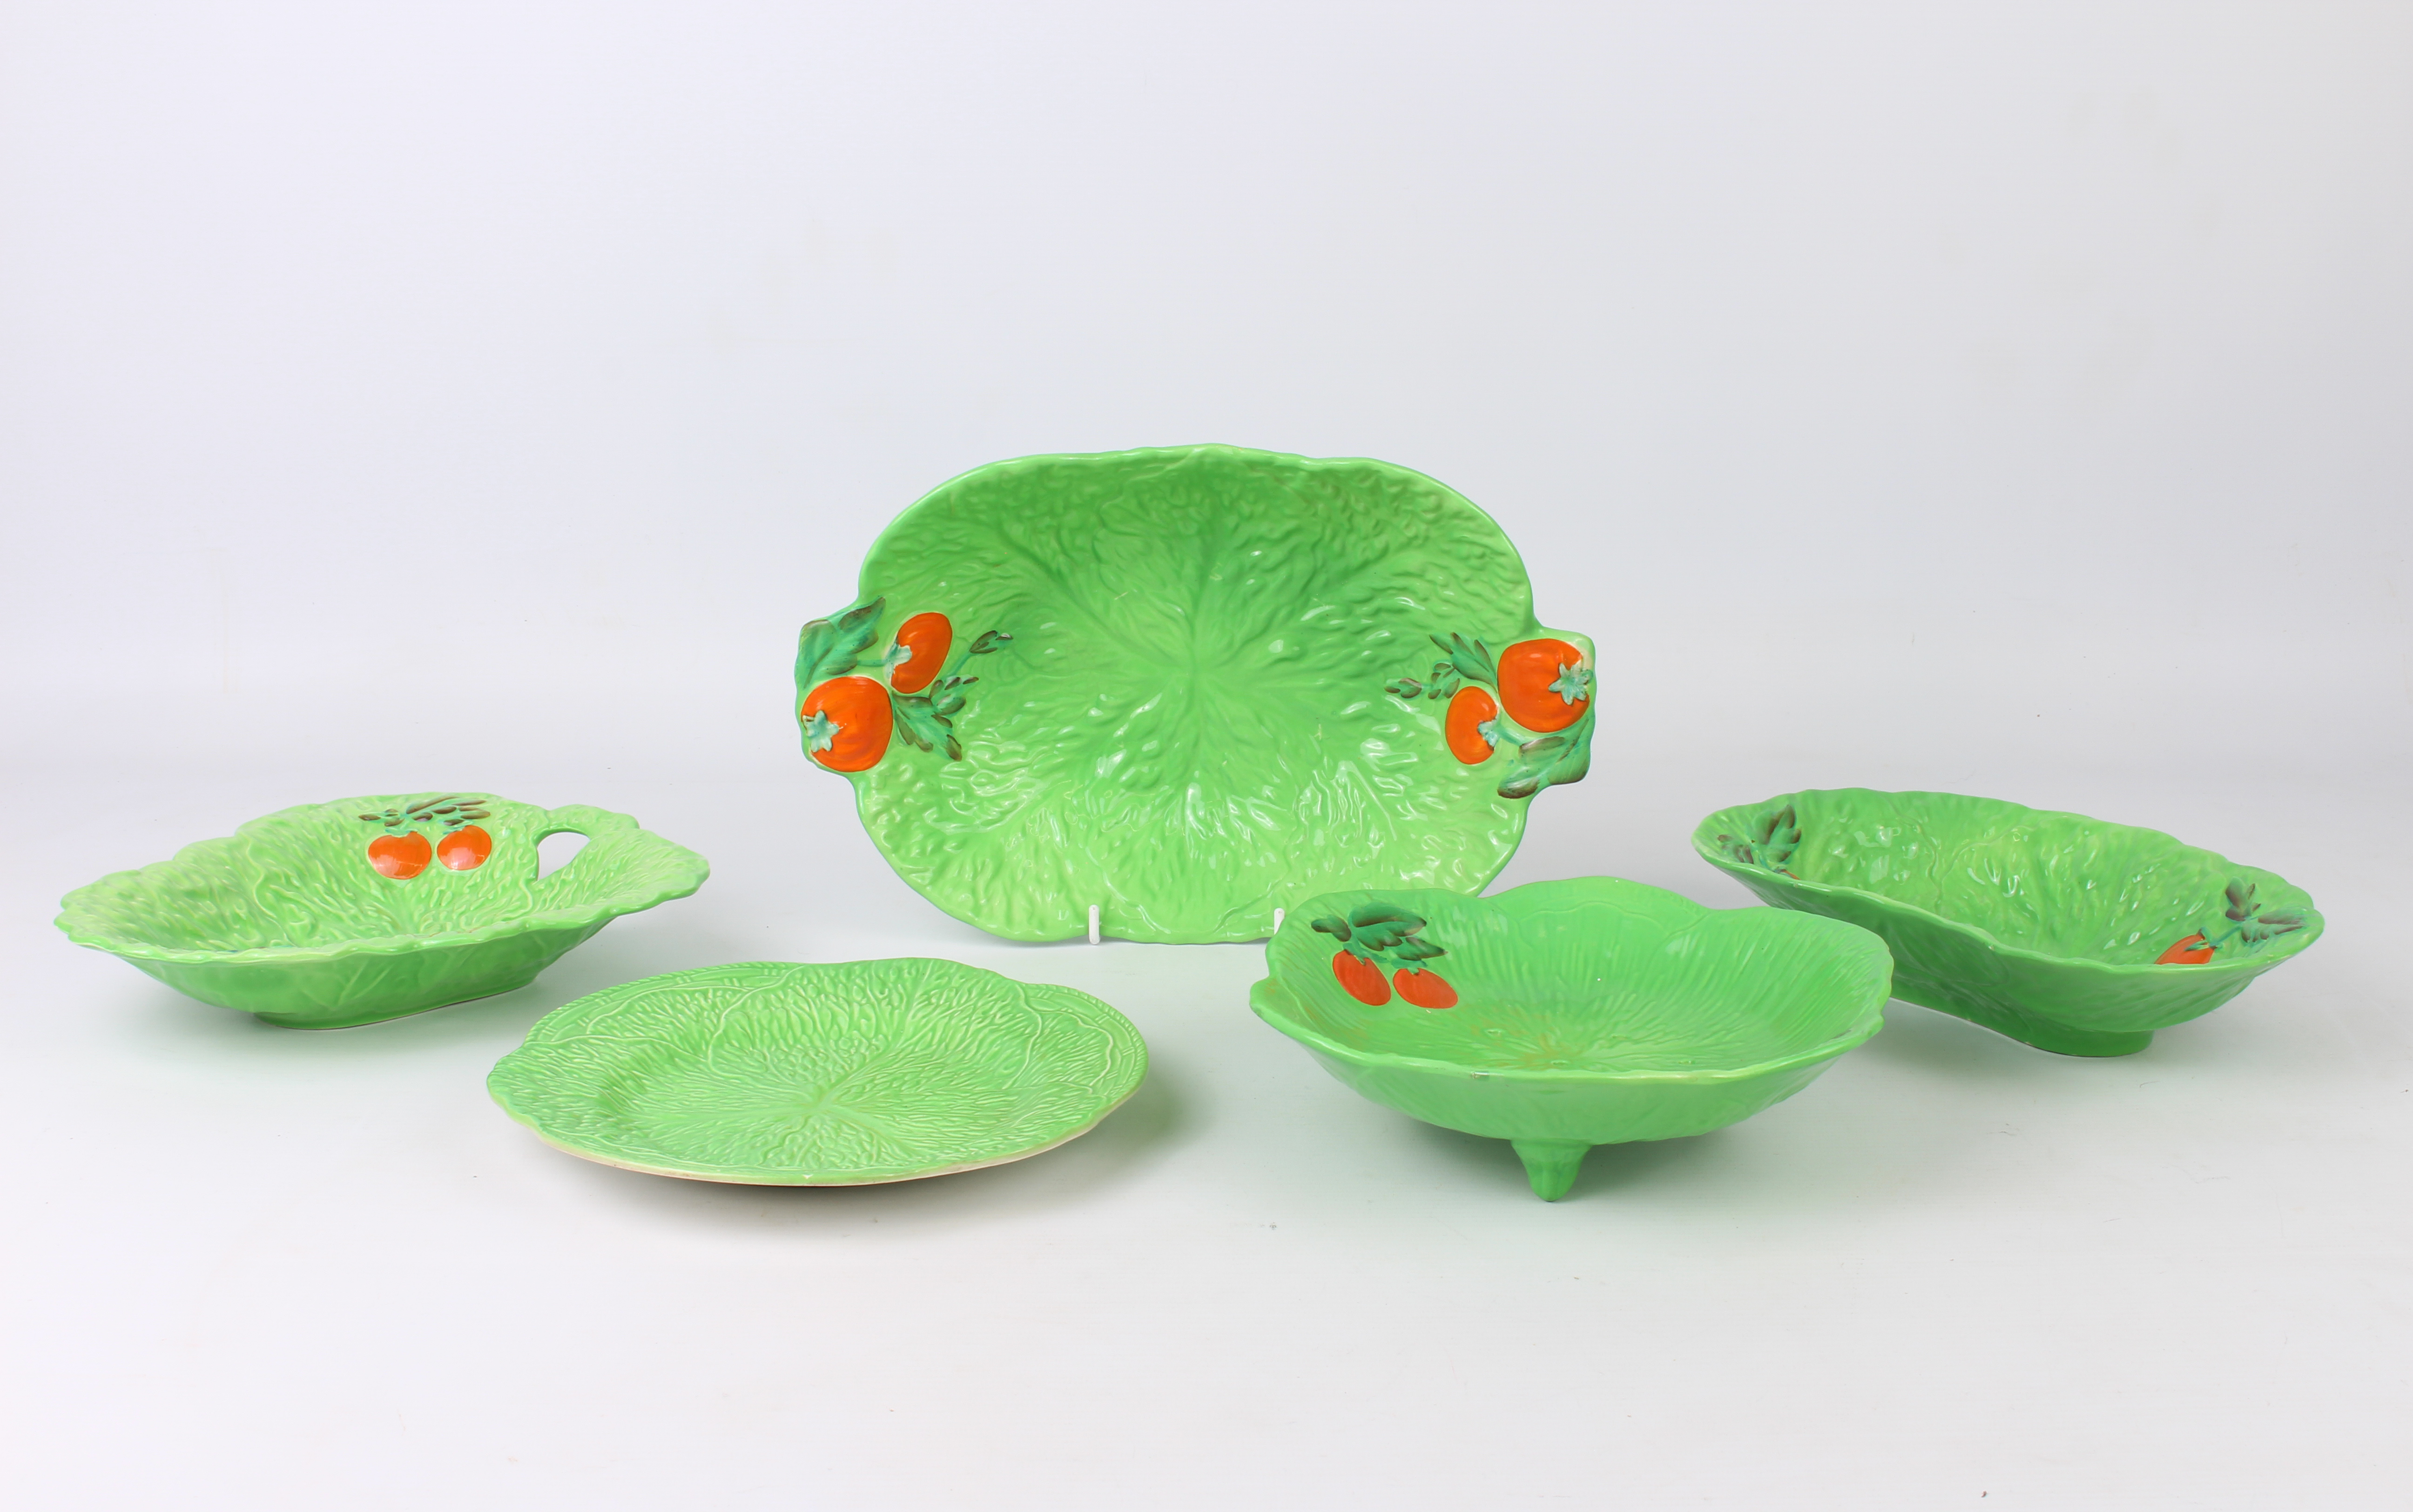 Five Beswick salad leaf plates - 1950s to 1960s, the largest 30 cm long. * Condition: All of the